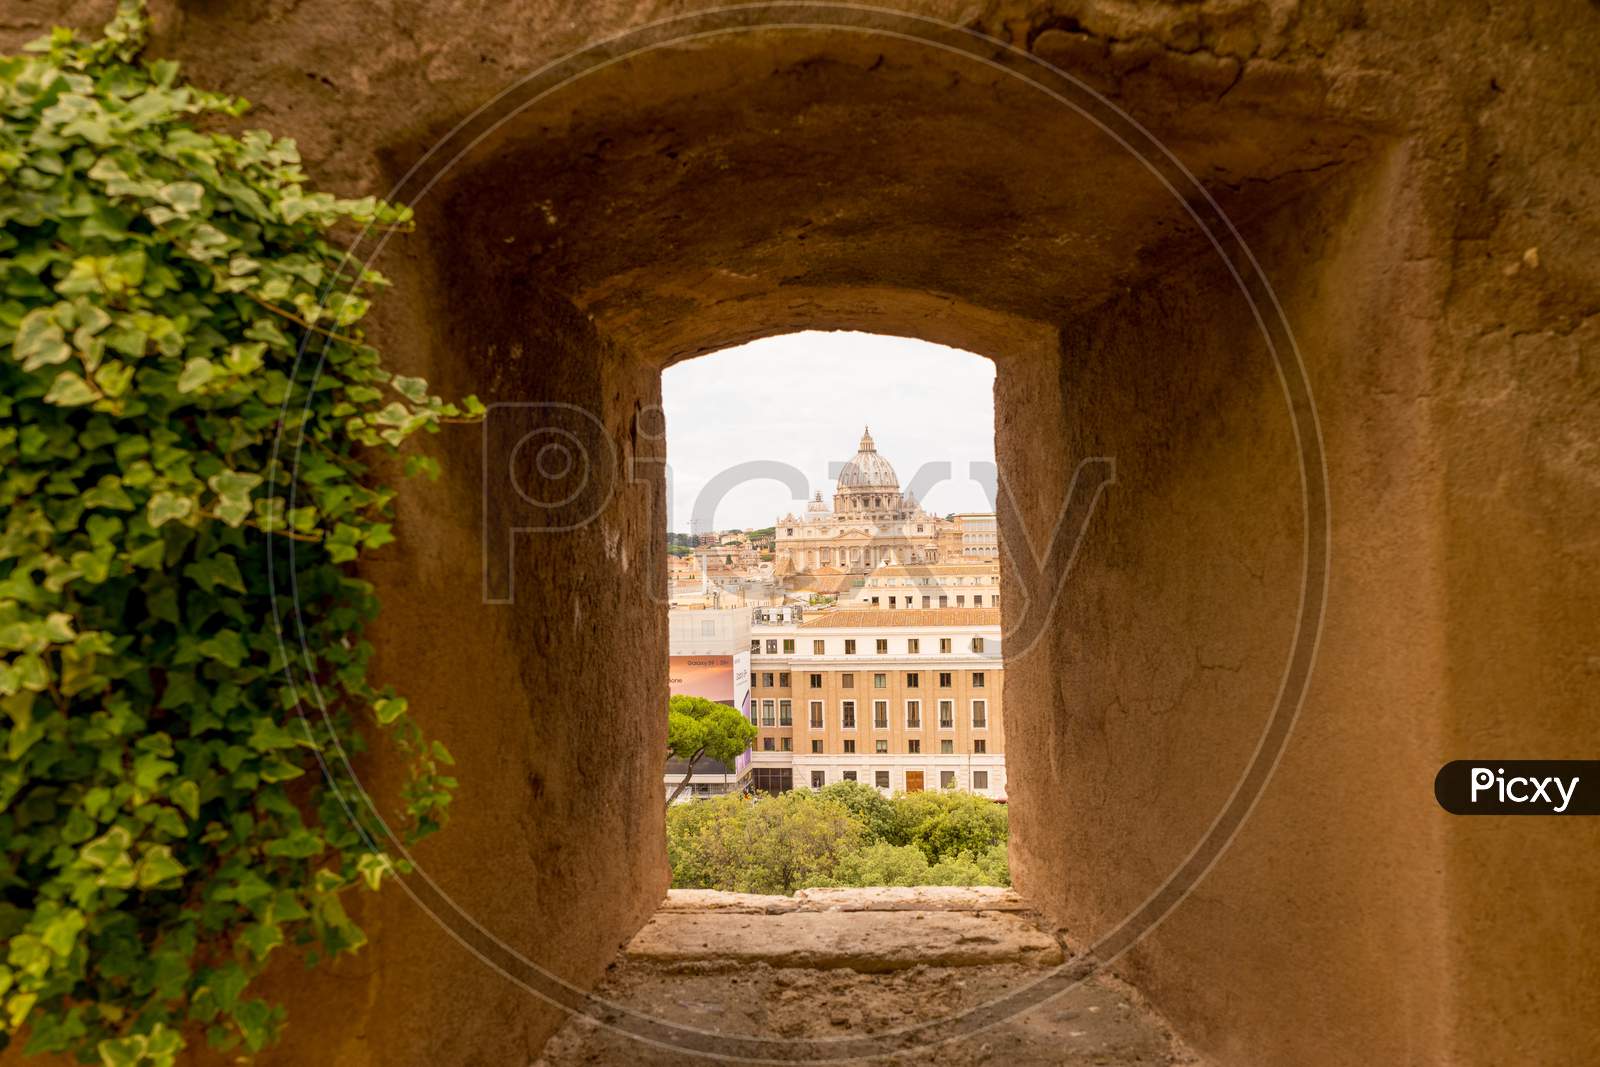 Rome, Italy - 23 June 2018: Saint Peter'S Church Viewed Through A Square Hole In Wall In Rome, Italy